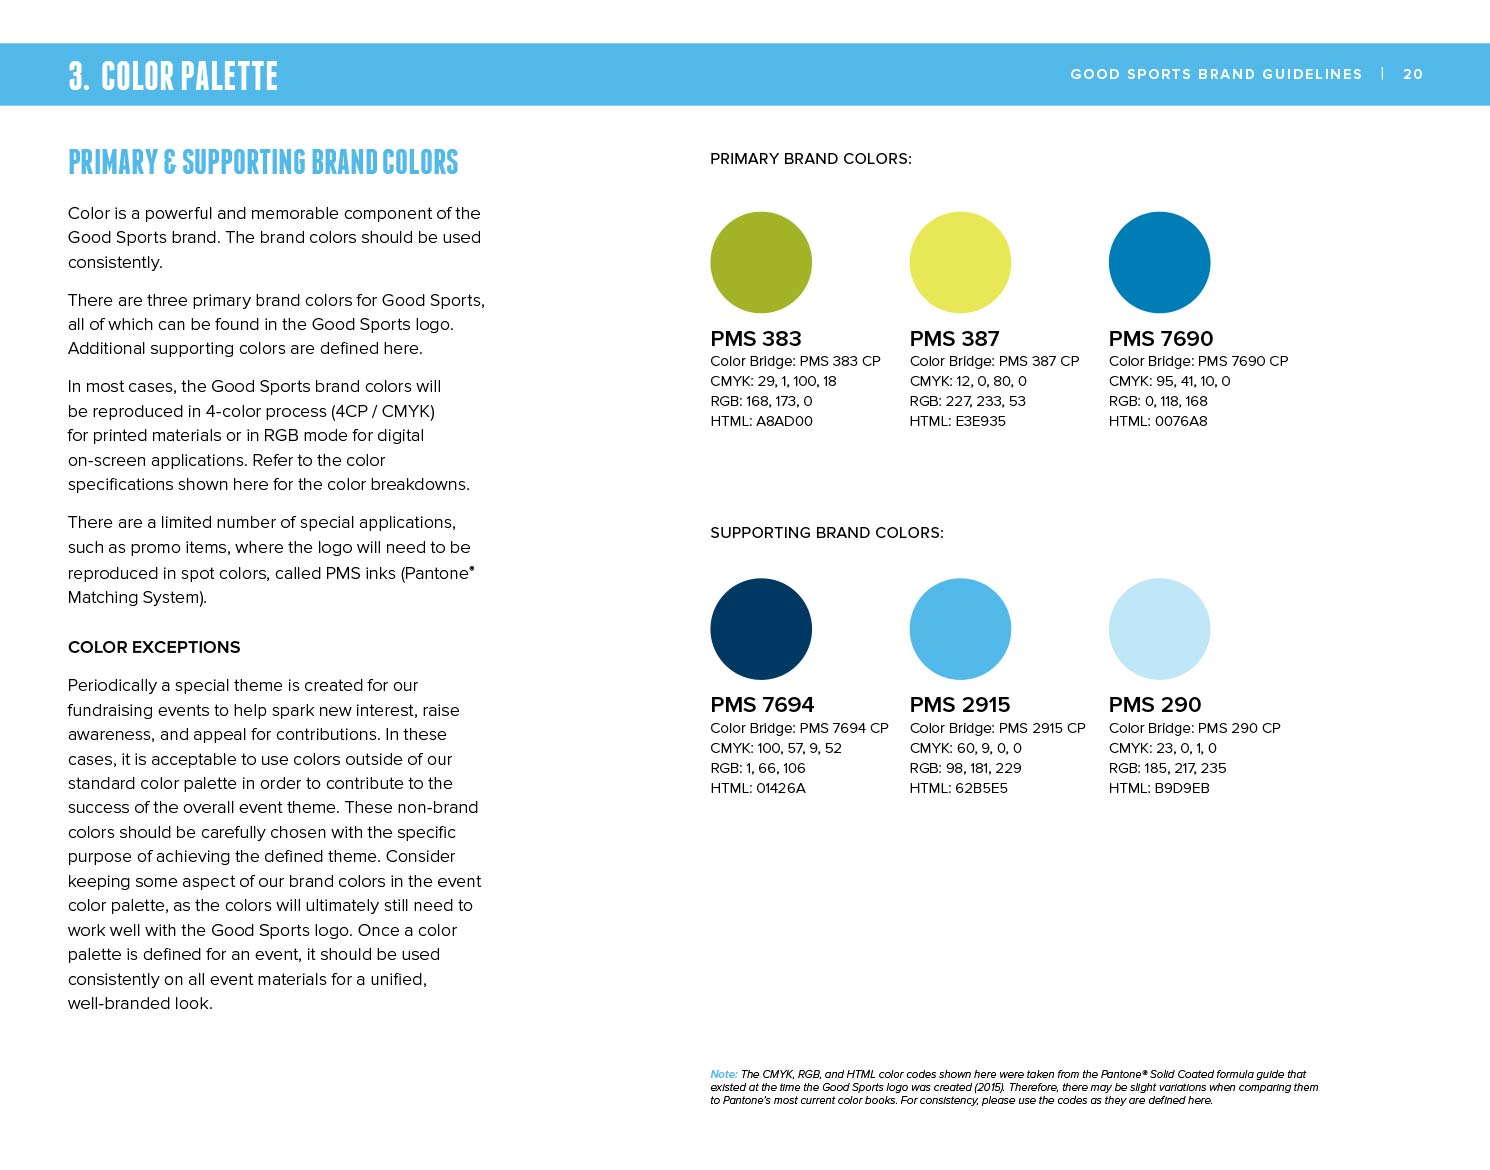 Good Sports Brand Guide showing color palette